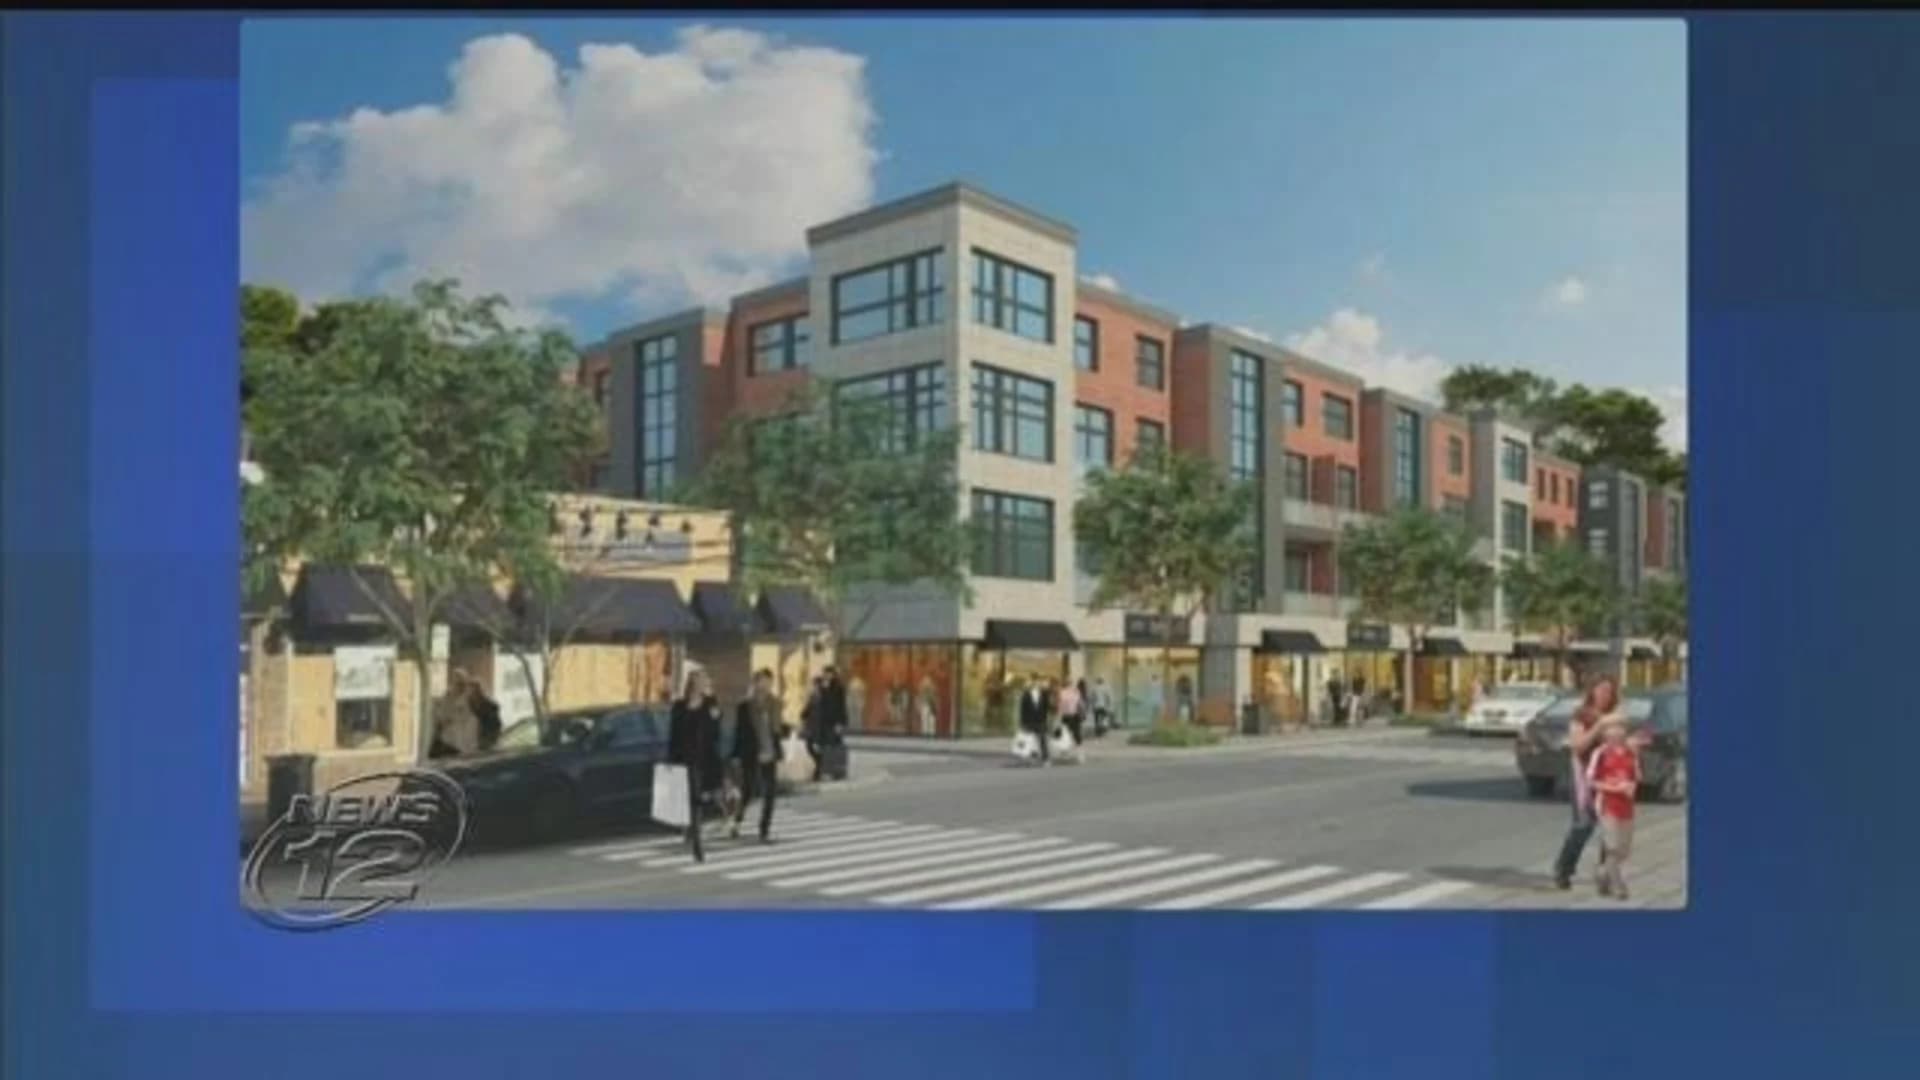 New apartment complex proposal faces opposition in Farmingdale